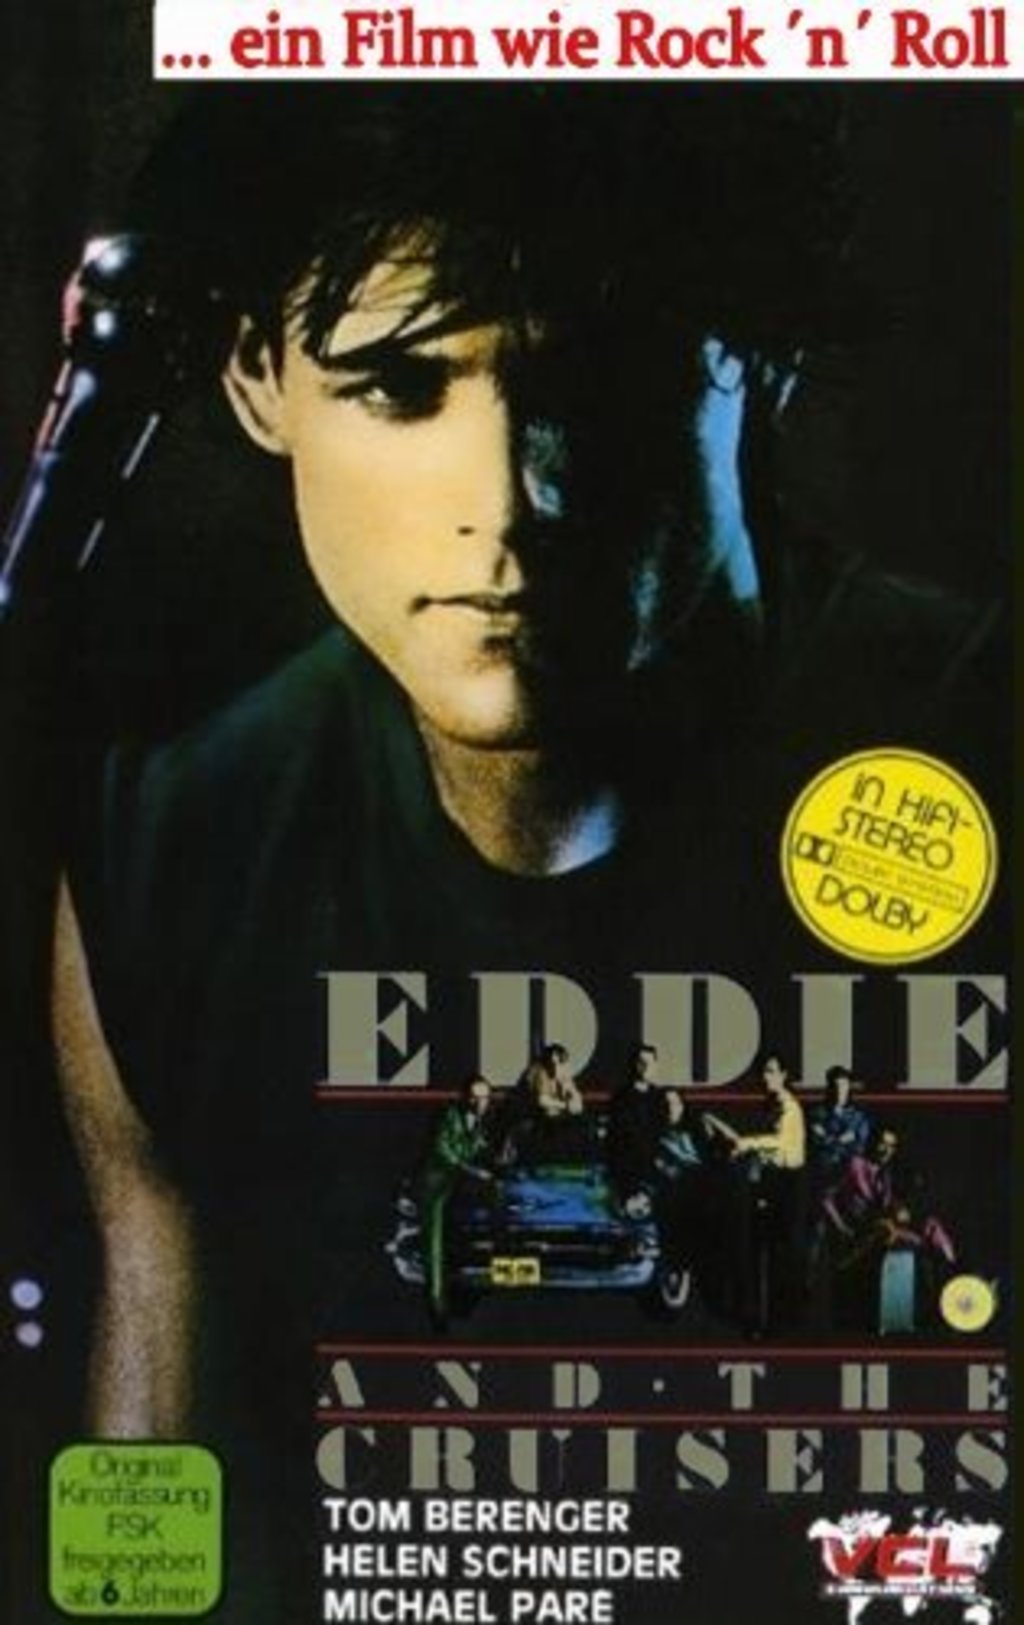 eddie and the cruisers movie download